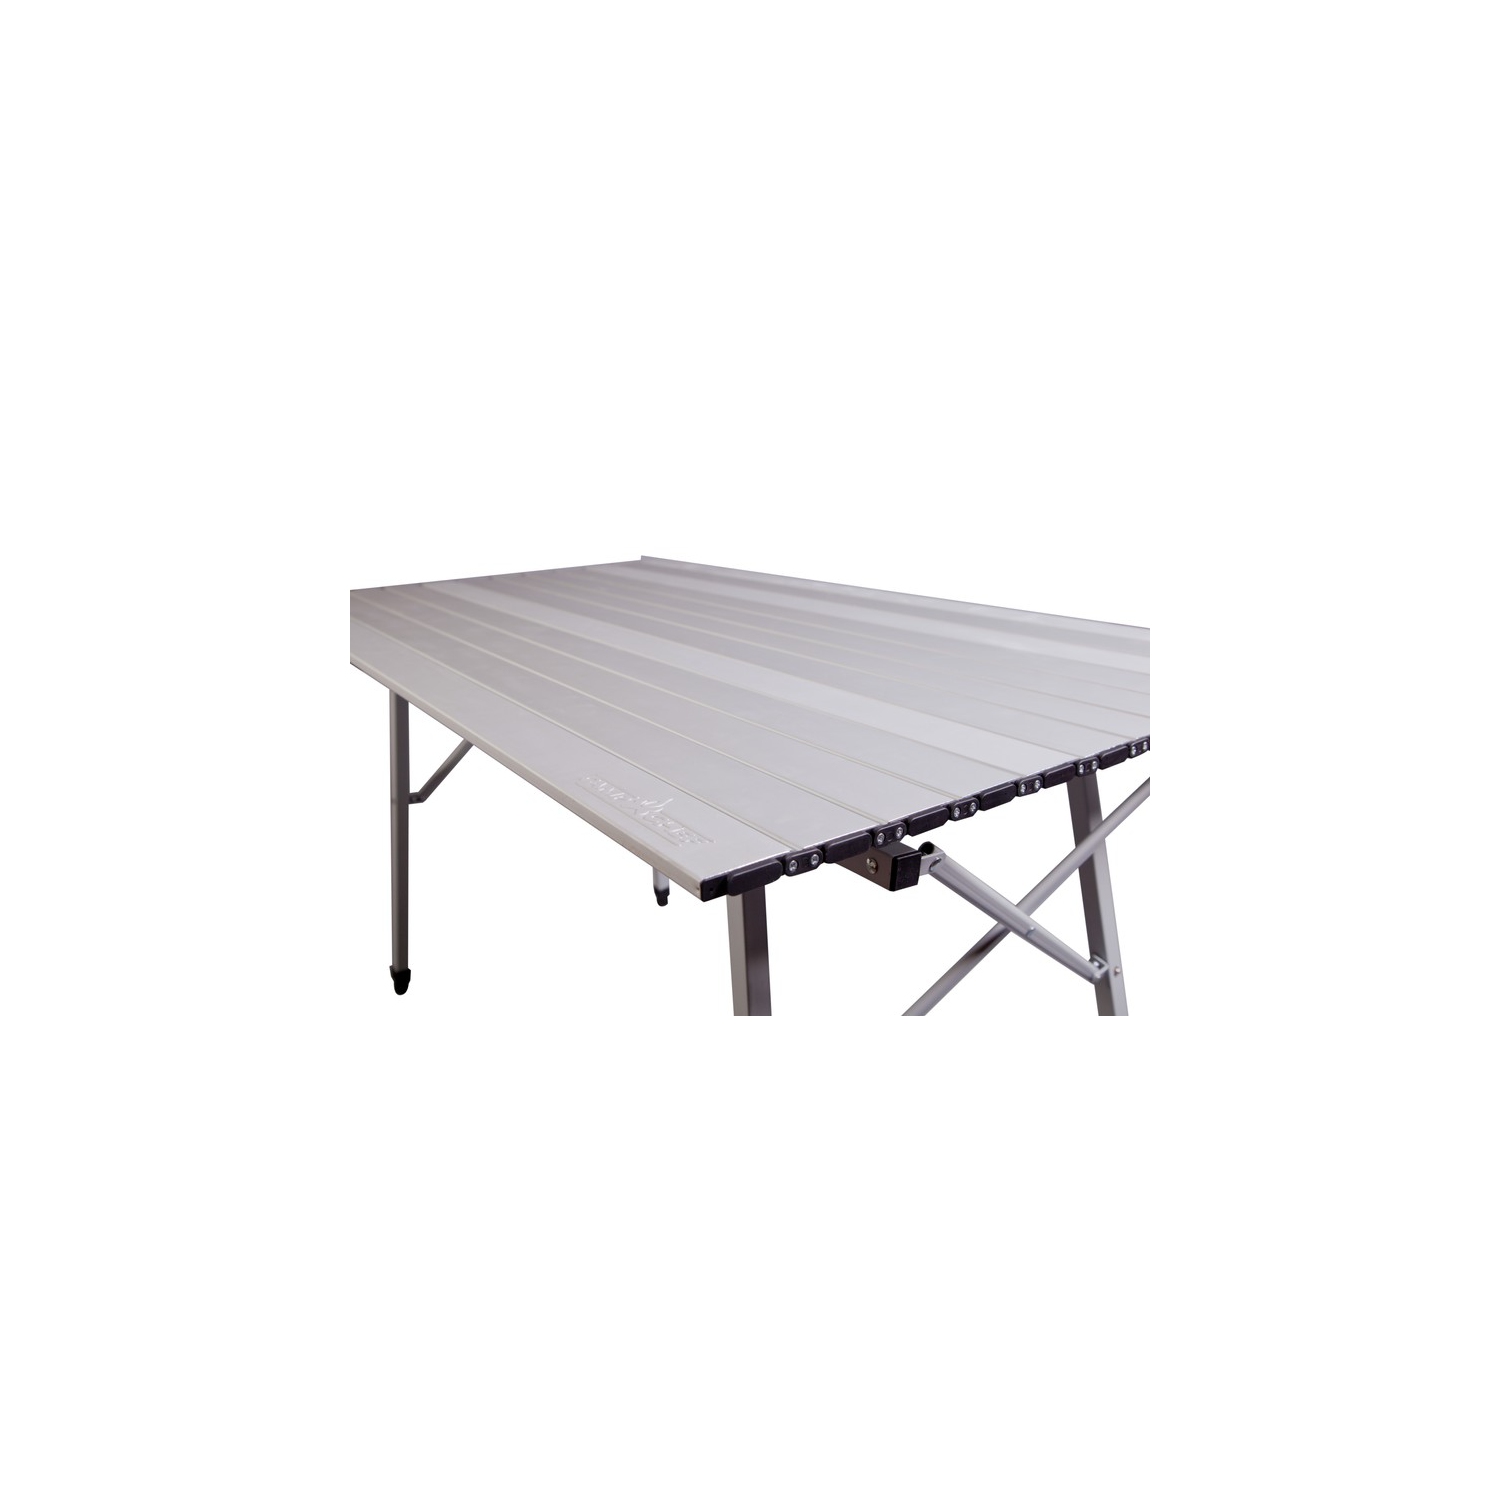 Camp Chef Mountain Series Mesa Adjustable Camp Table